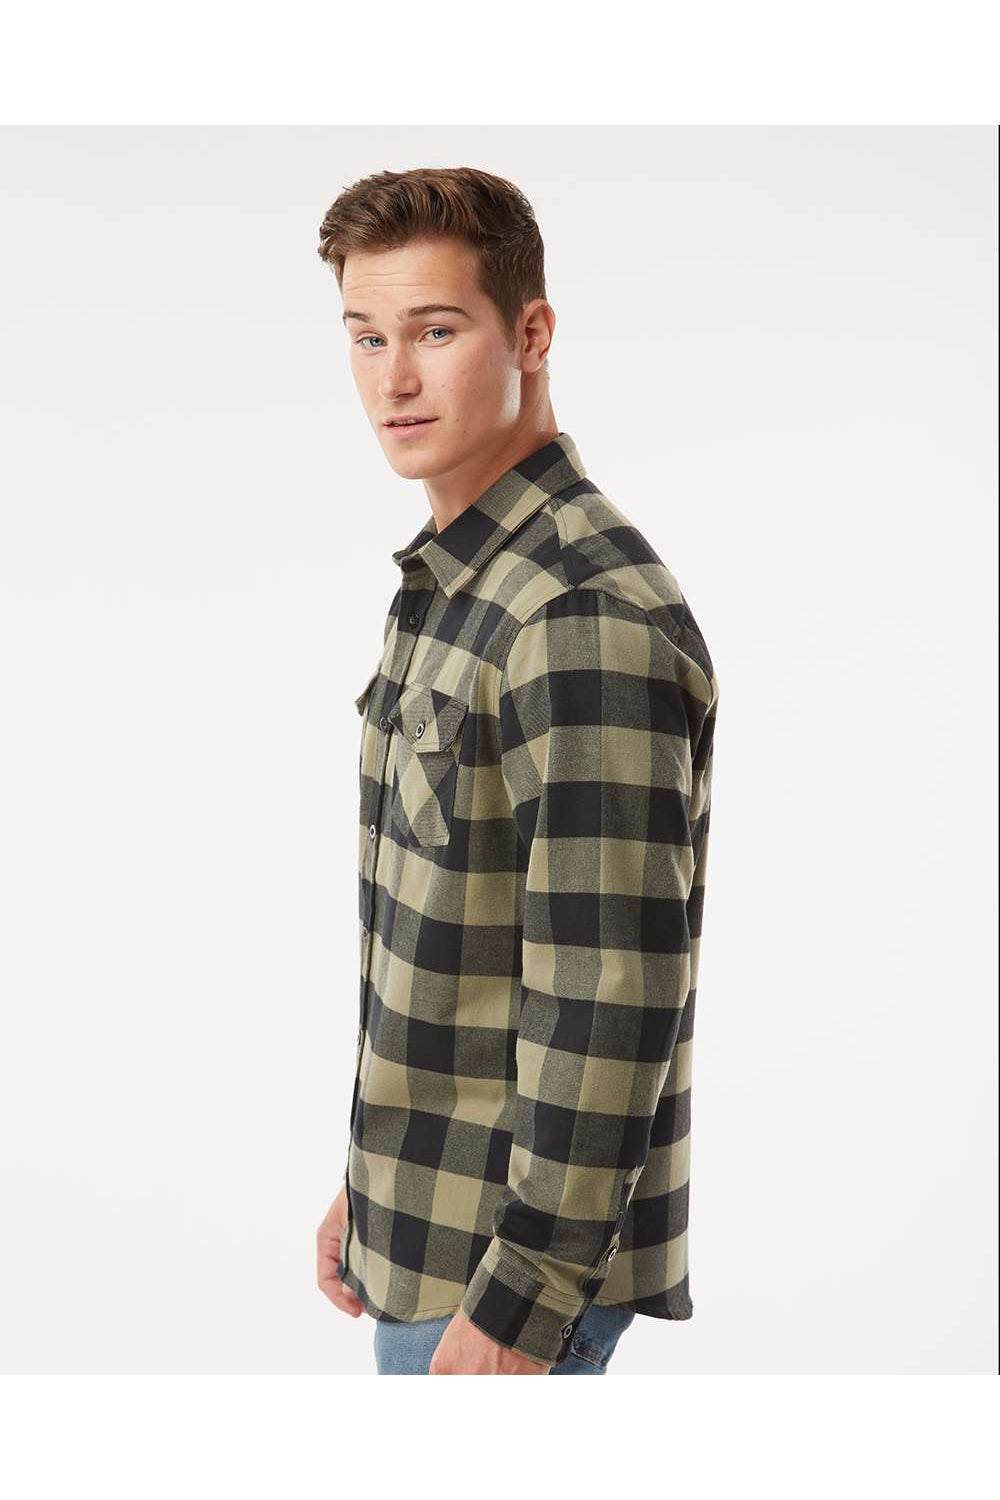 Independent Trading Co. EXP50F Mens Long Sleeve Button Down Flannel Shirt w/ Double Pockets Olive Green/Black Model Side